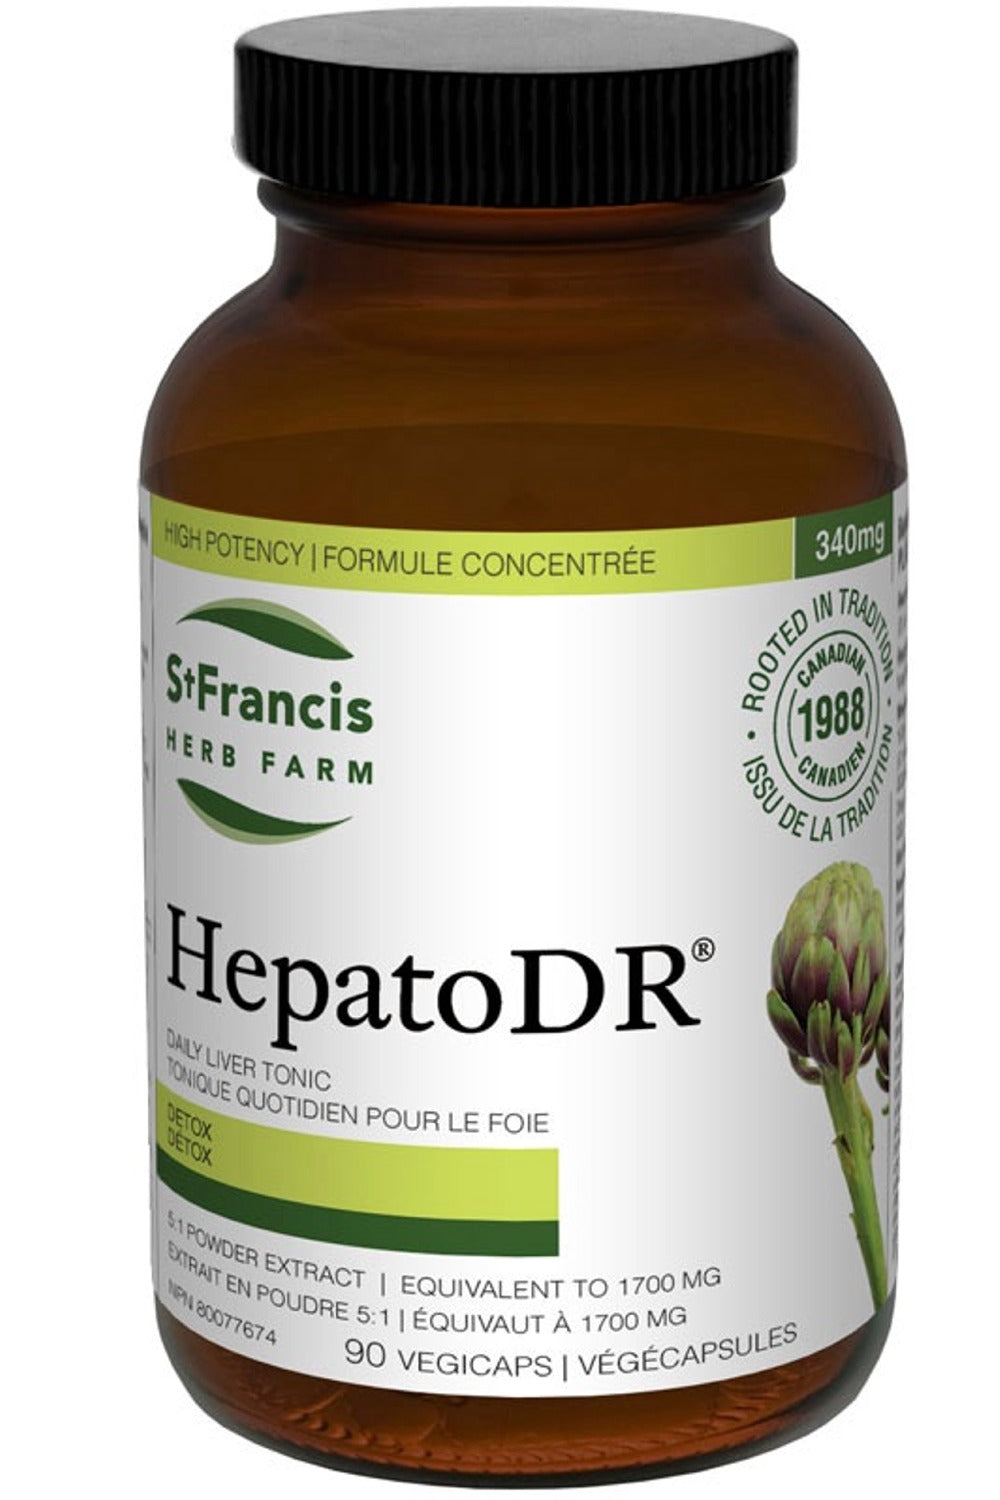 ST FRANCIS HERB FARM HepatoDR 5:1 Extract (90 vcaps)